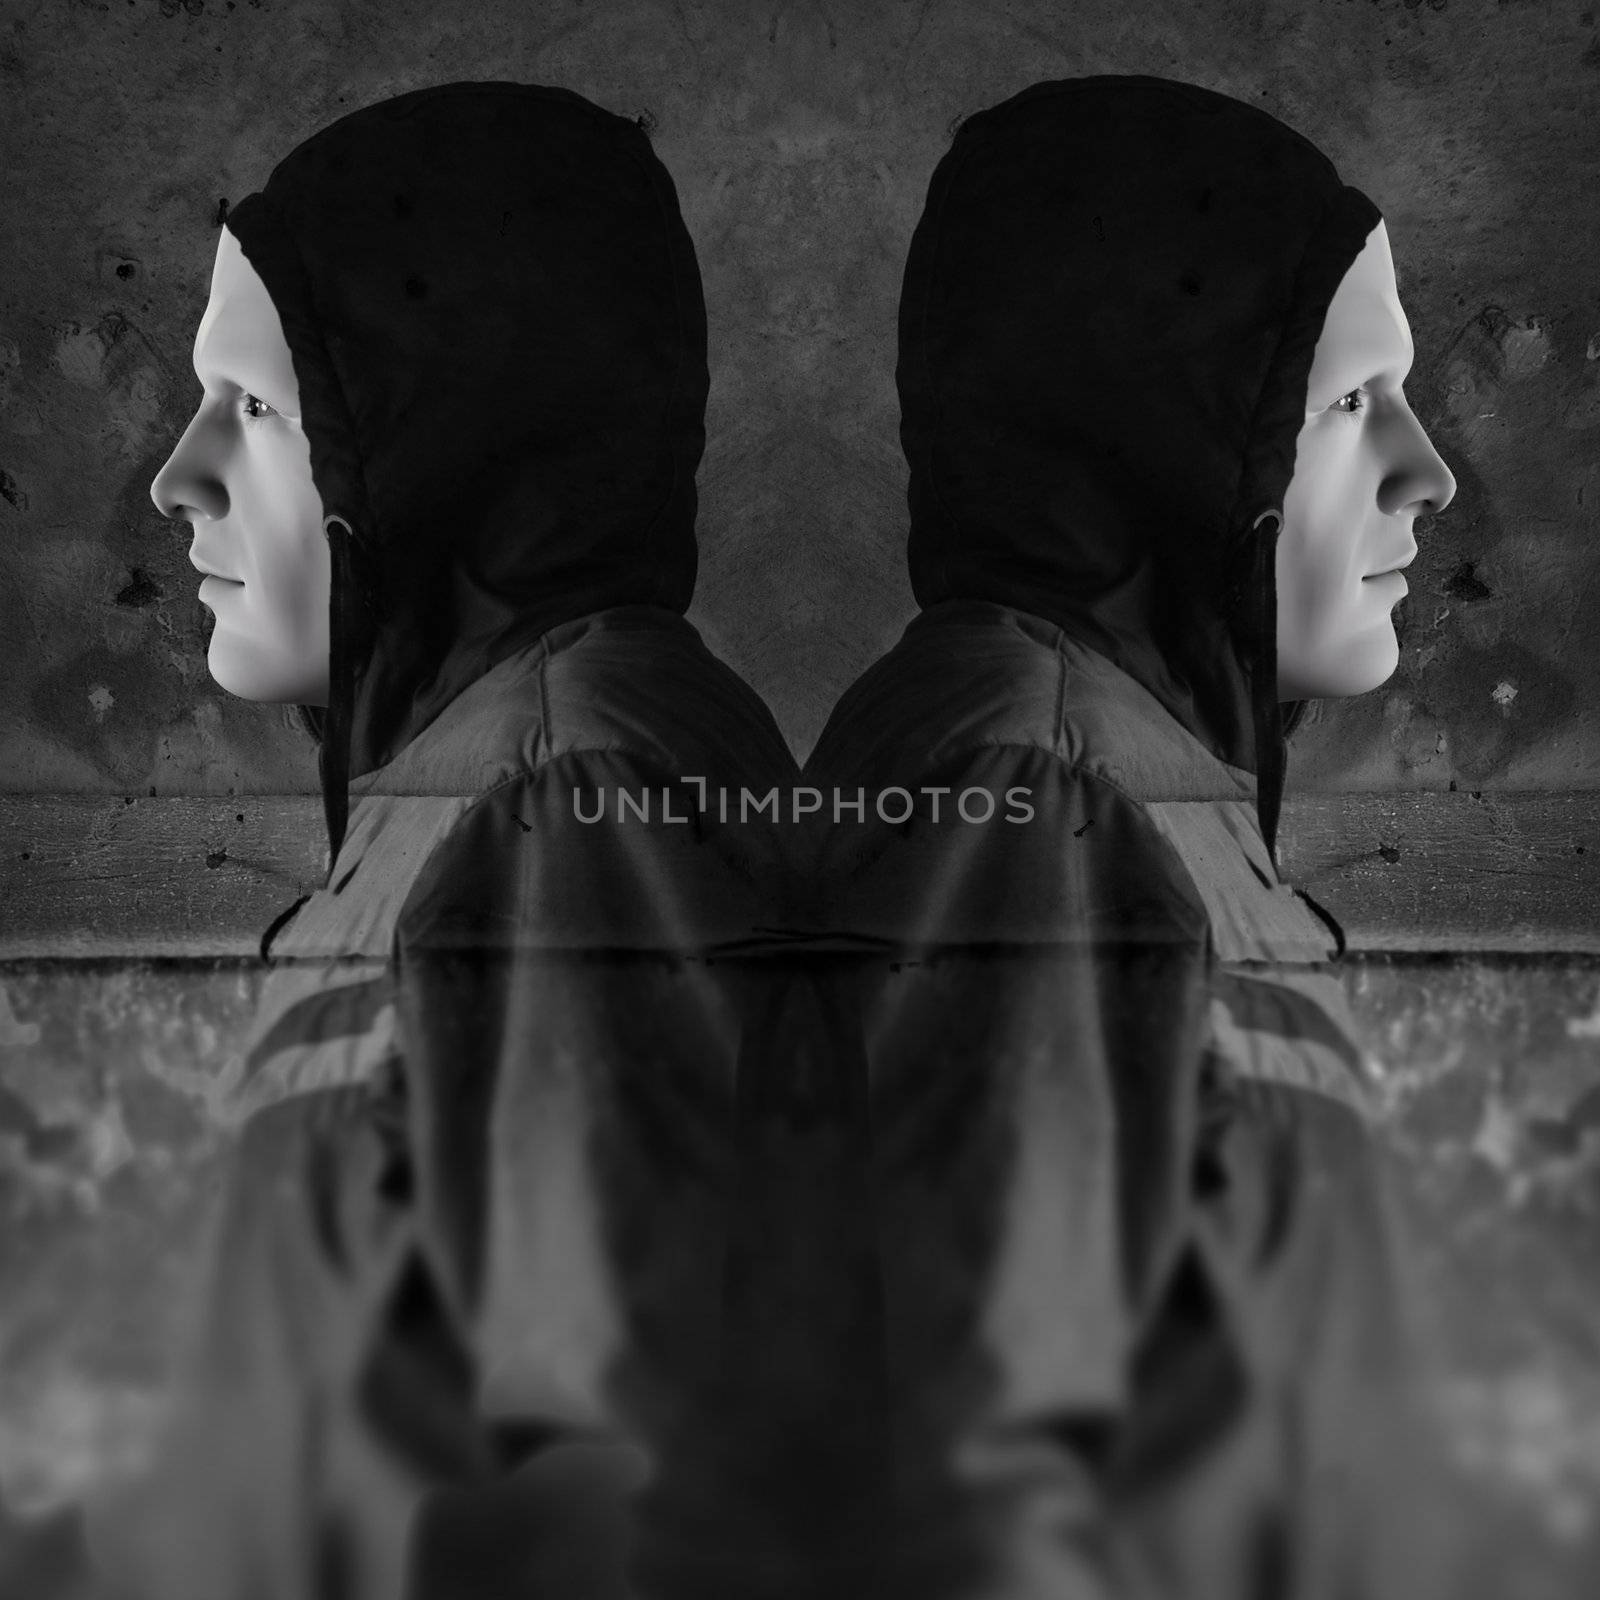 twin hooded figures by sirylok